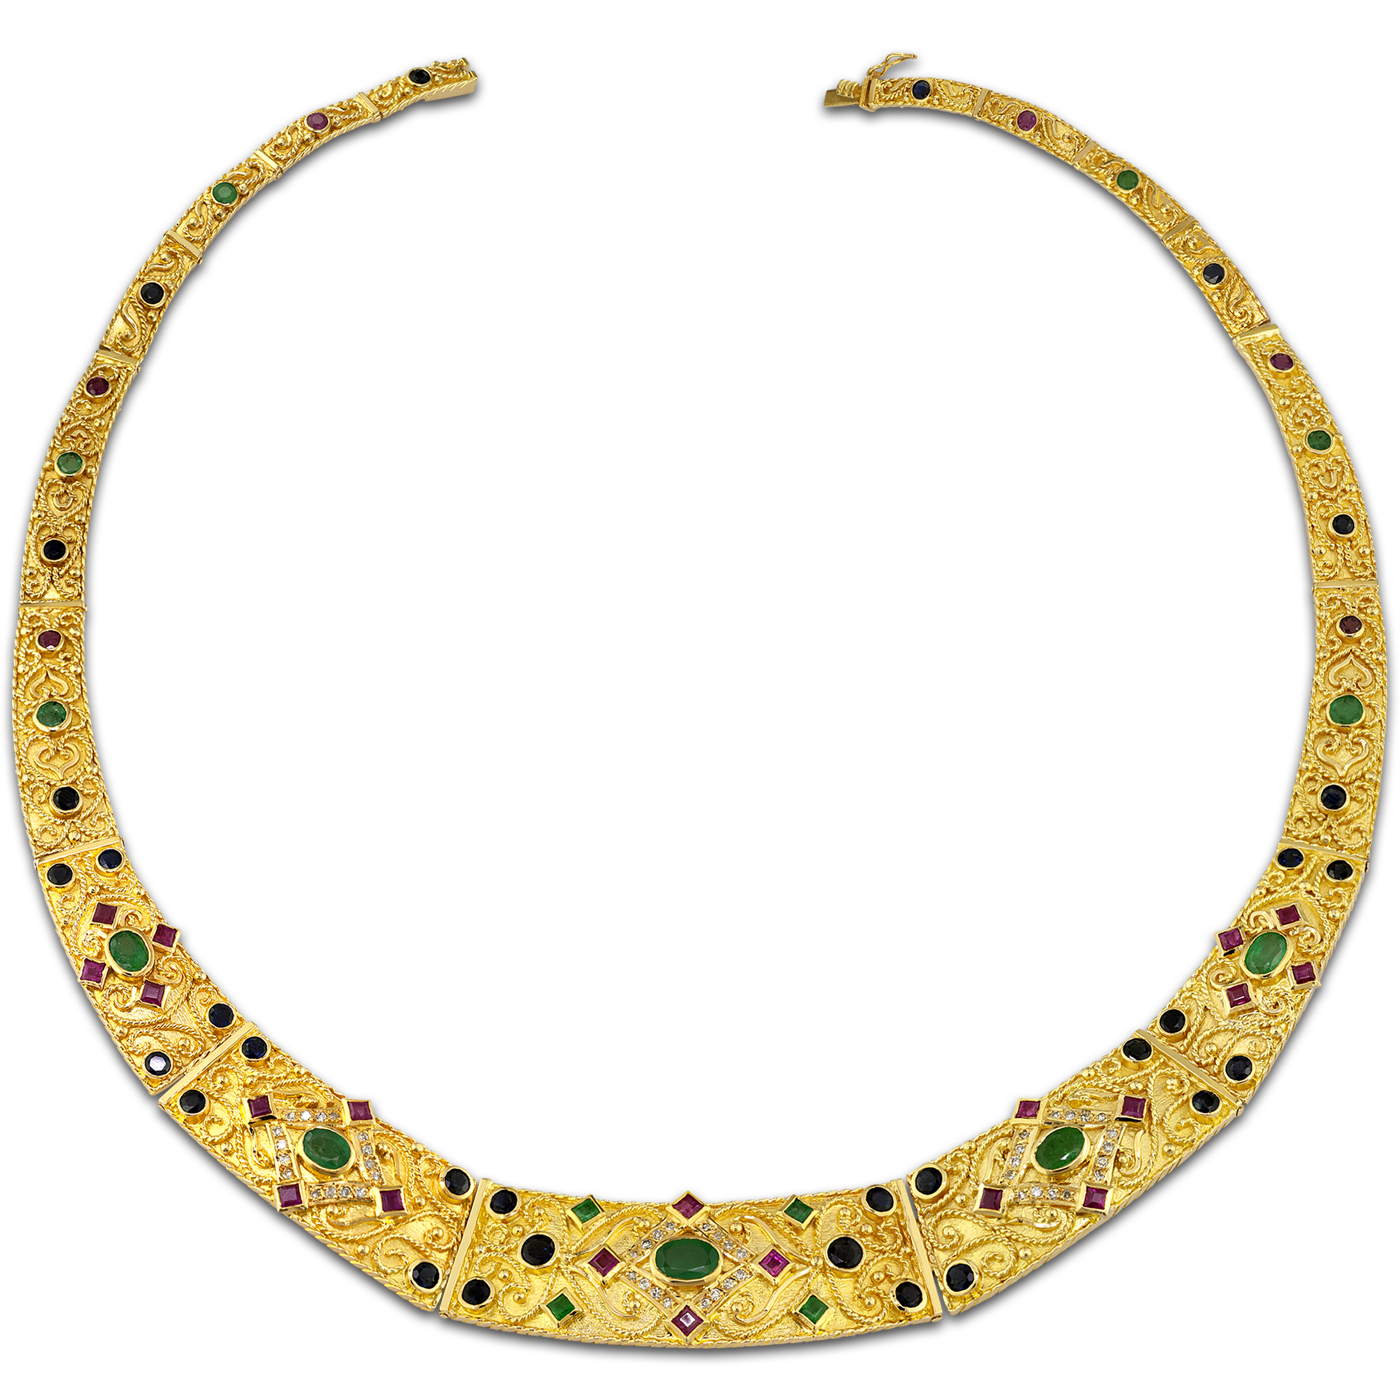 Imperial gold necklace with precious stones